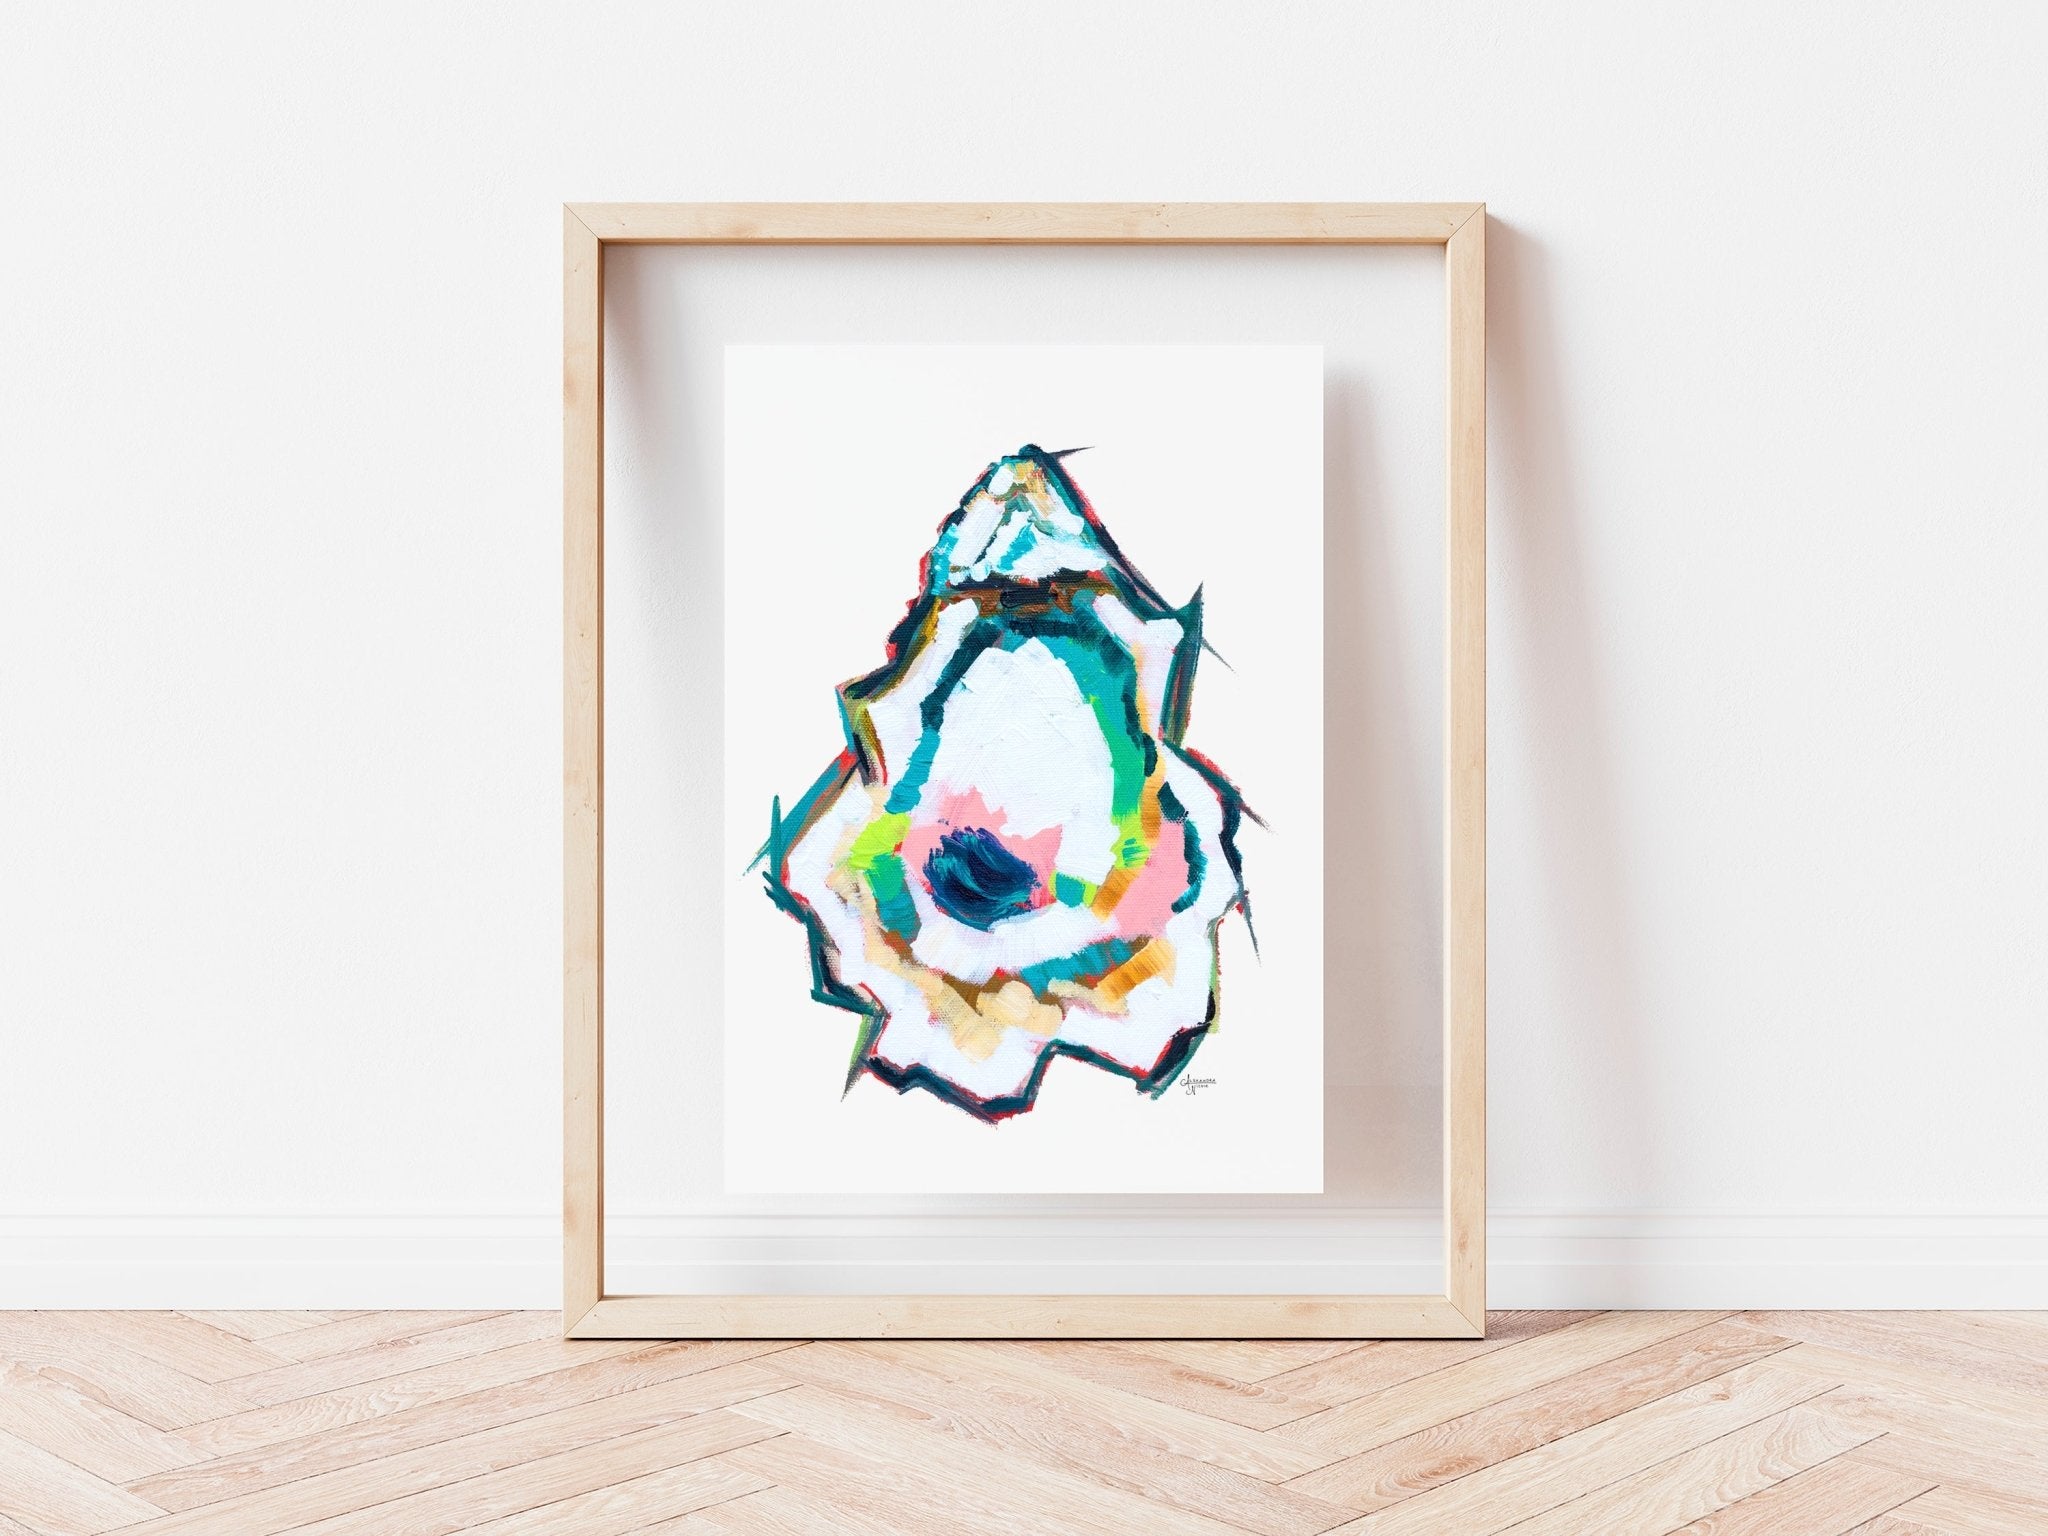 Abstract Oyster Shell - Indian Point 1 - ArtByAlexandraNicole